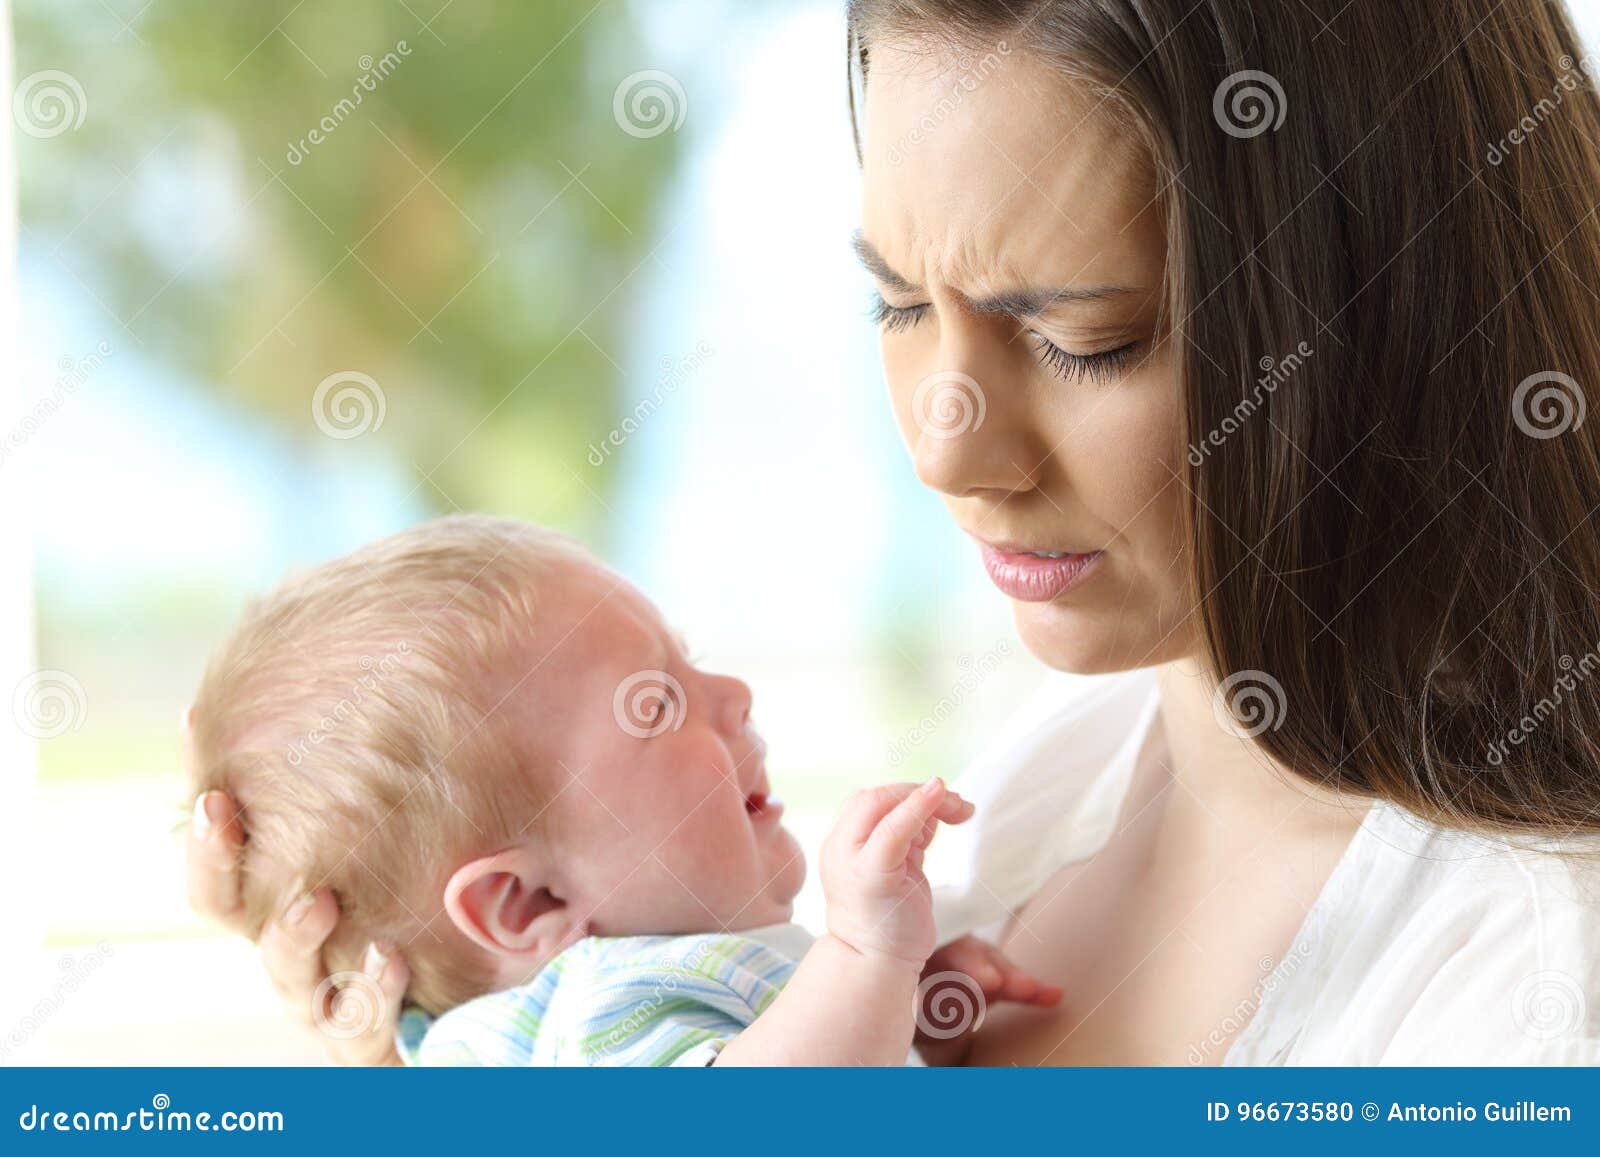 tired desperate mother and baby crying